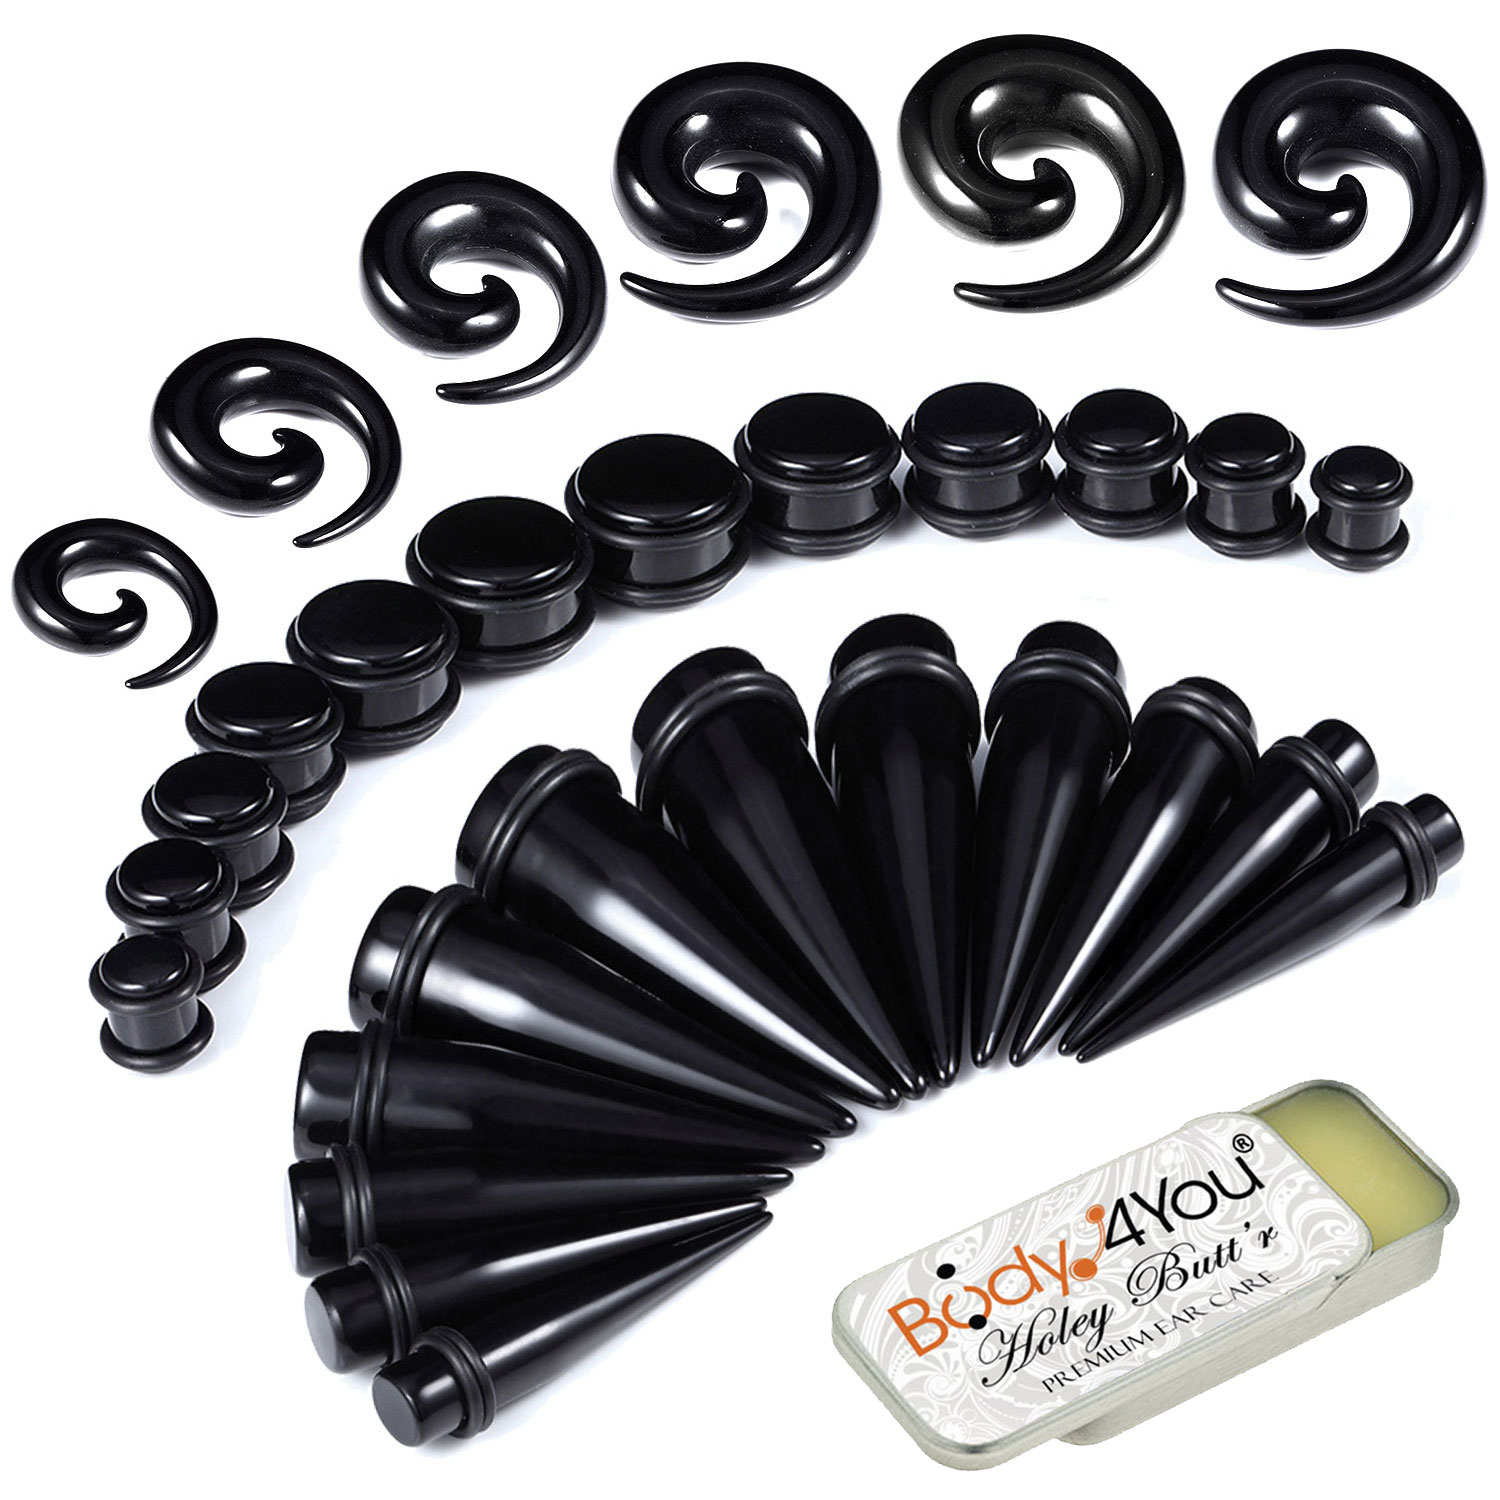 BodyJ4You 37PC Gauges Kit Ear Stretching Aftercare Balm 00G-20mm Turquoise Spiral Taper Plugs Set